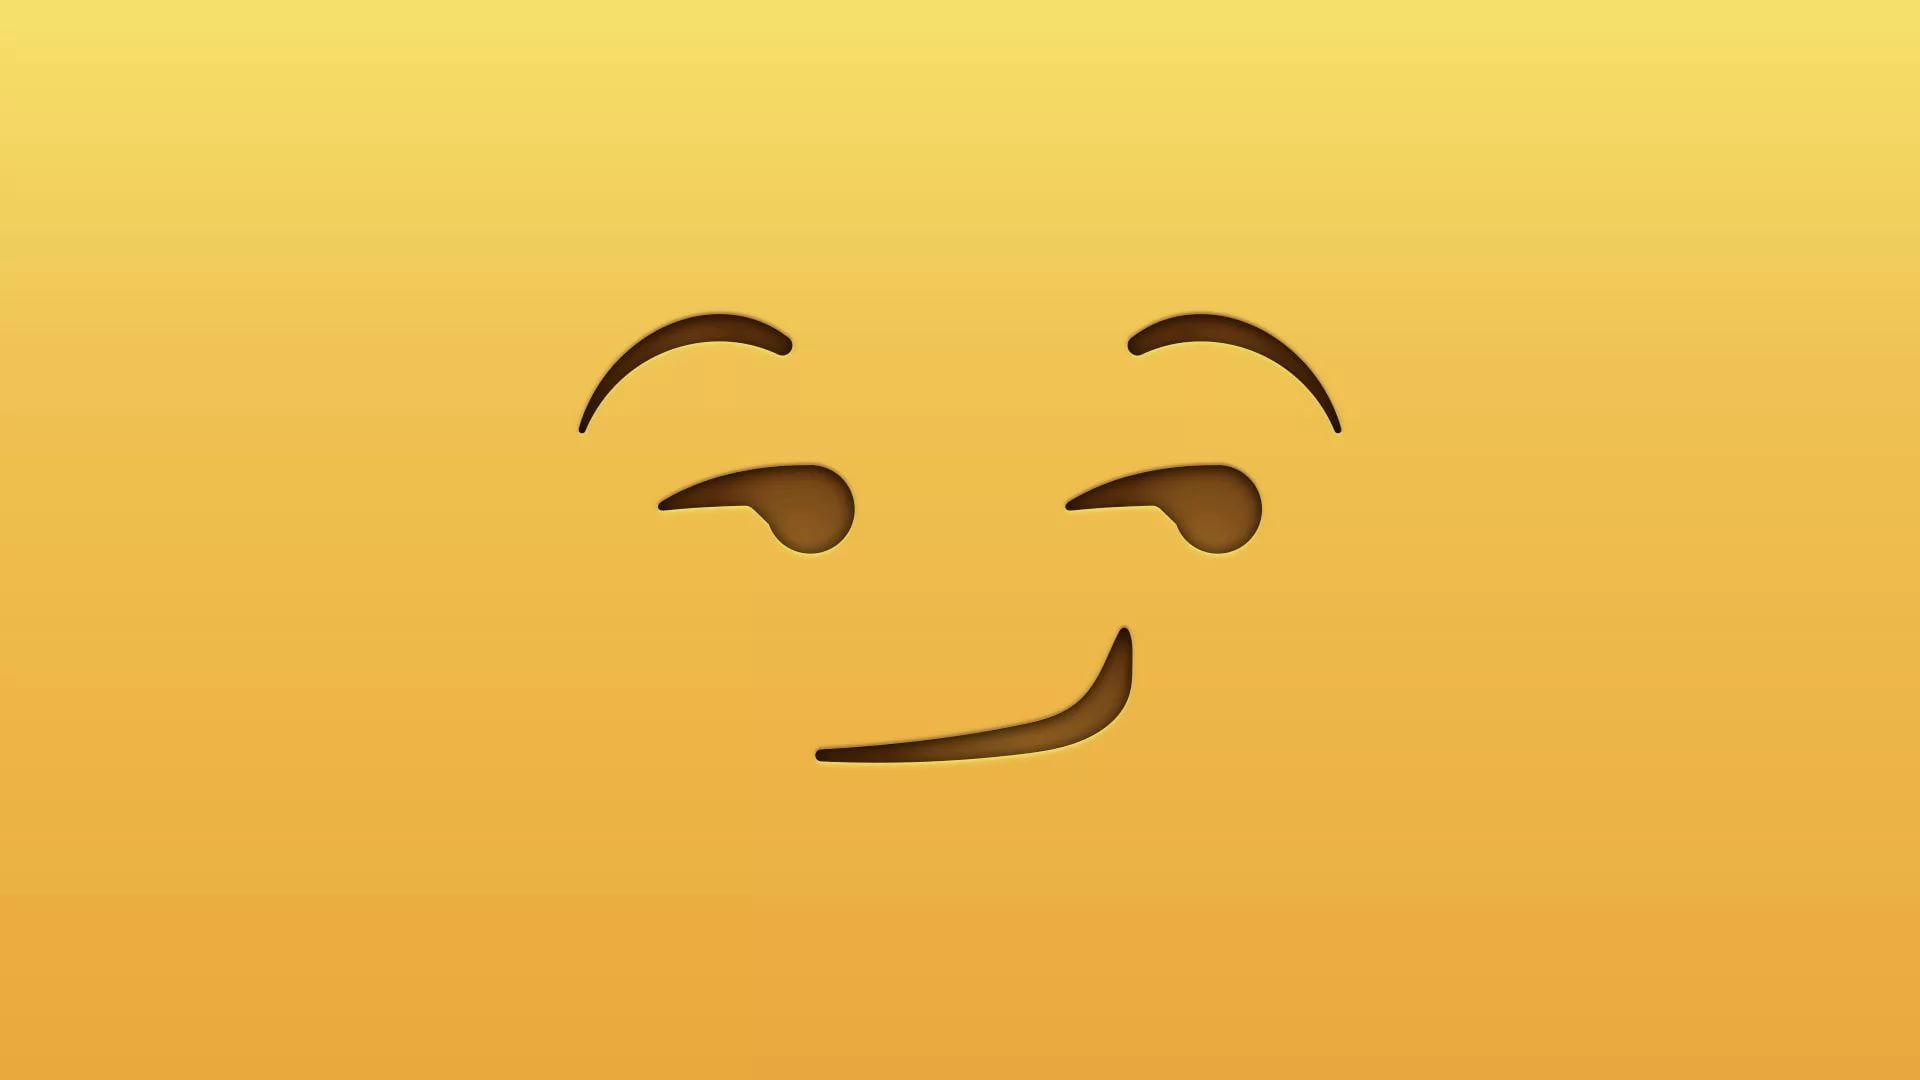 The emoticon face with a yellow background - Emoji